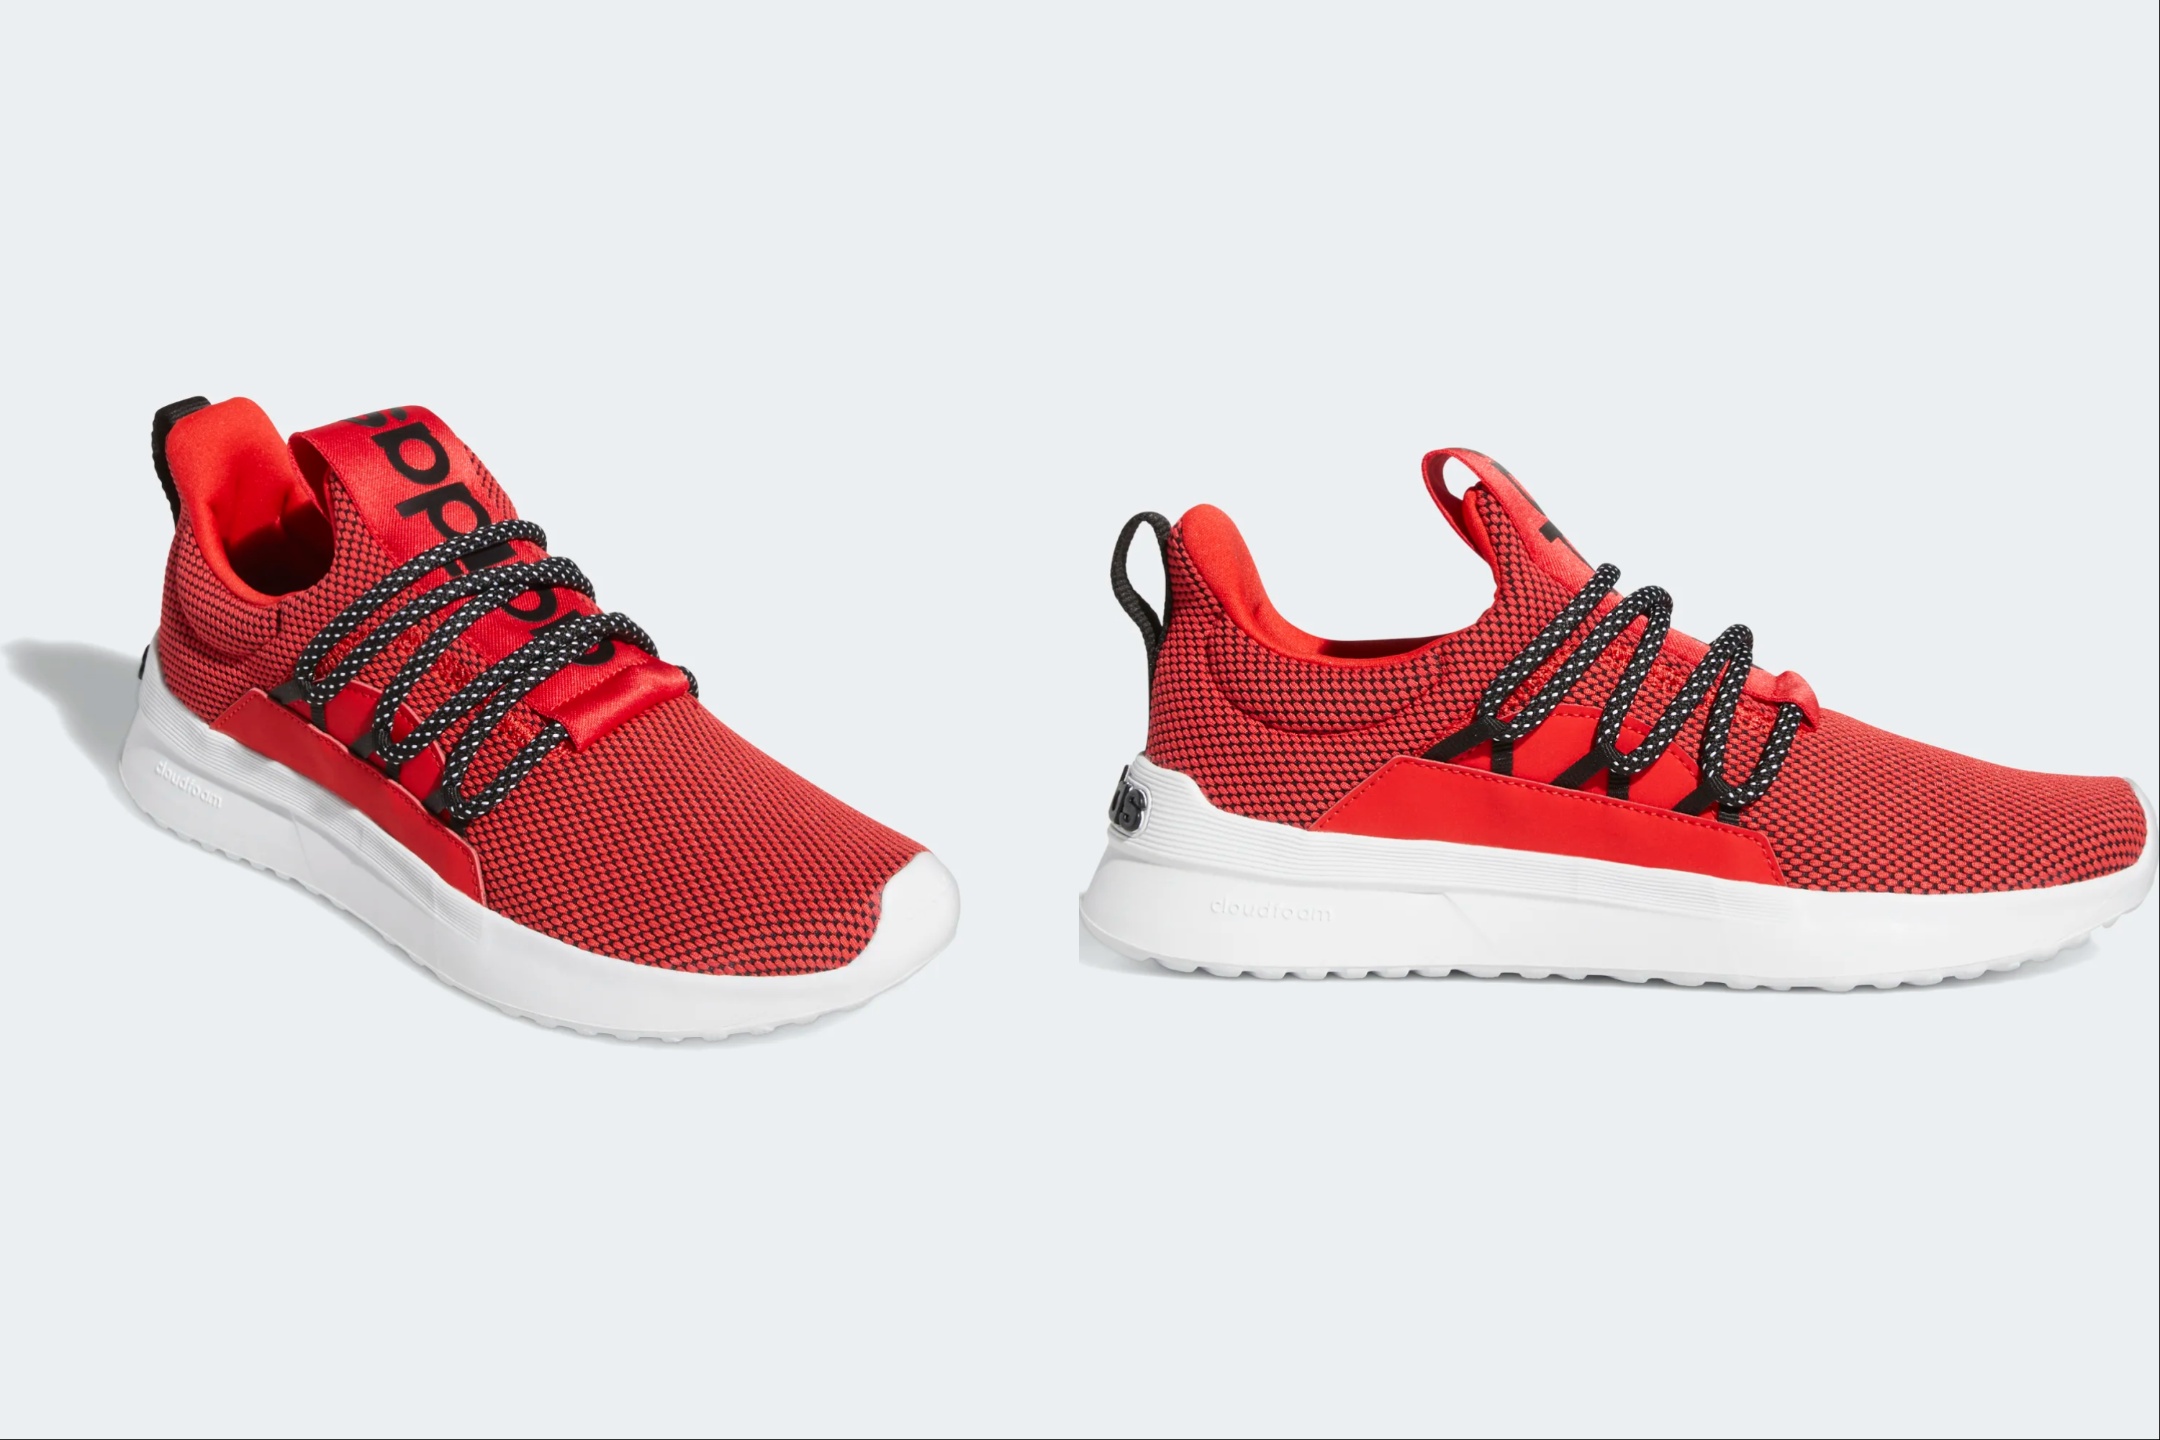 Deal Alert: These adidas Lite Race Adapt 5.0 Are Marked Down To $42 Right Now - BroBible